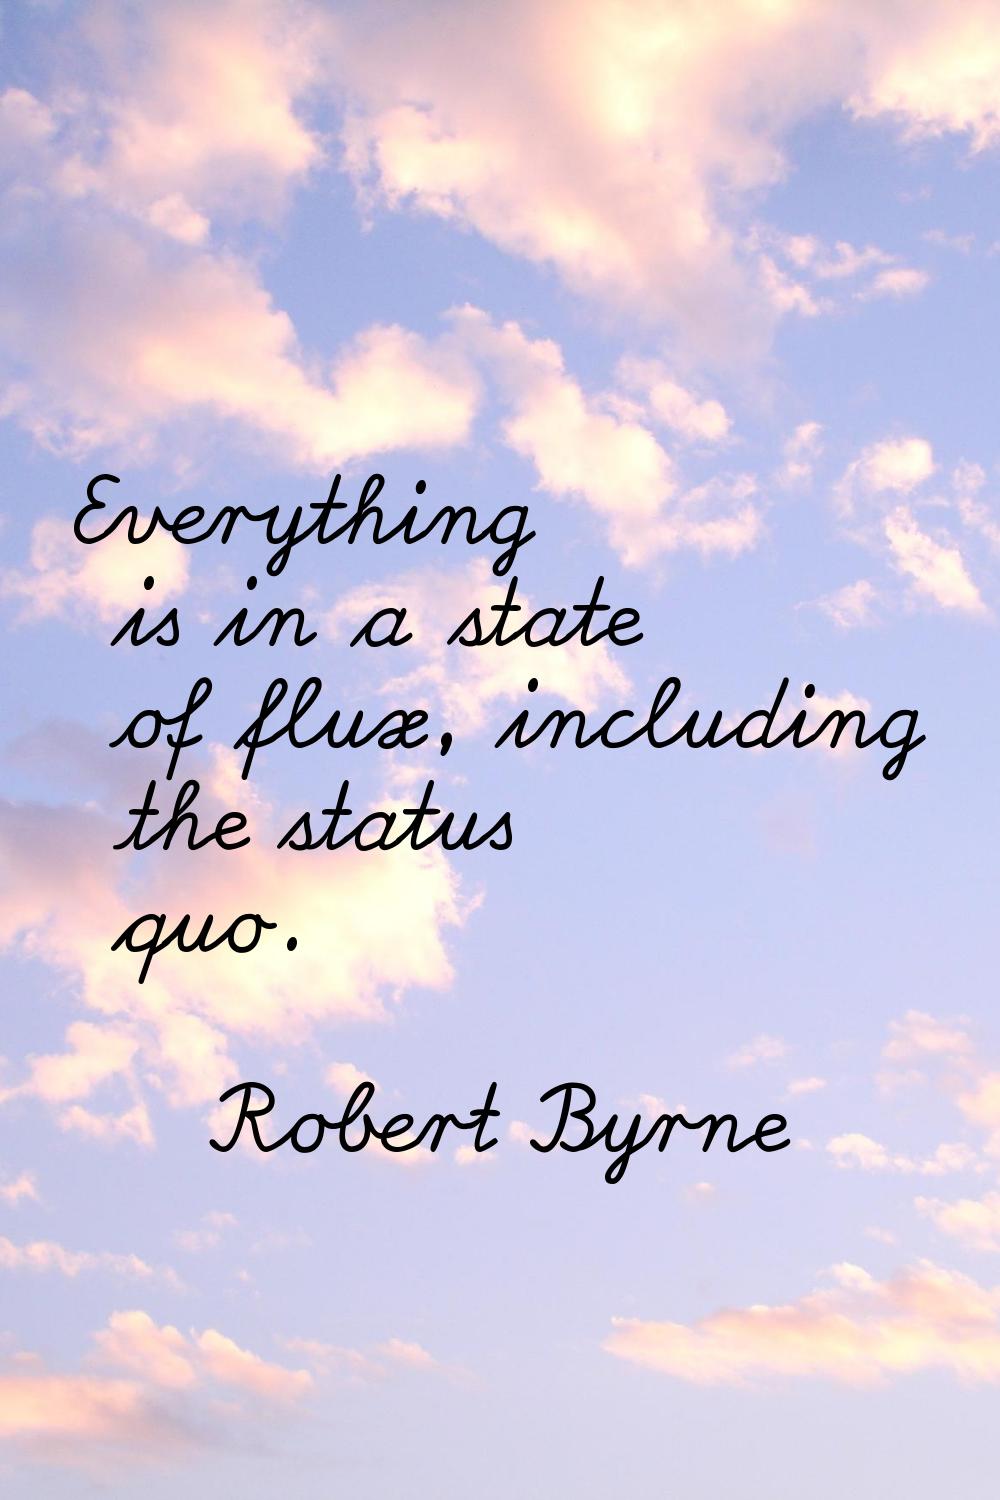 Everything is in a state of flux, including the status quo.